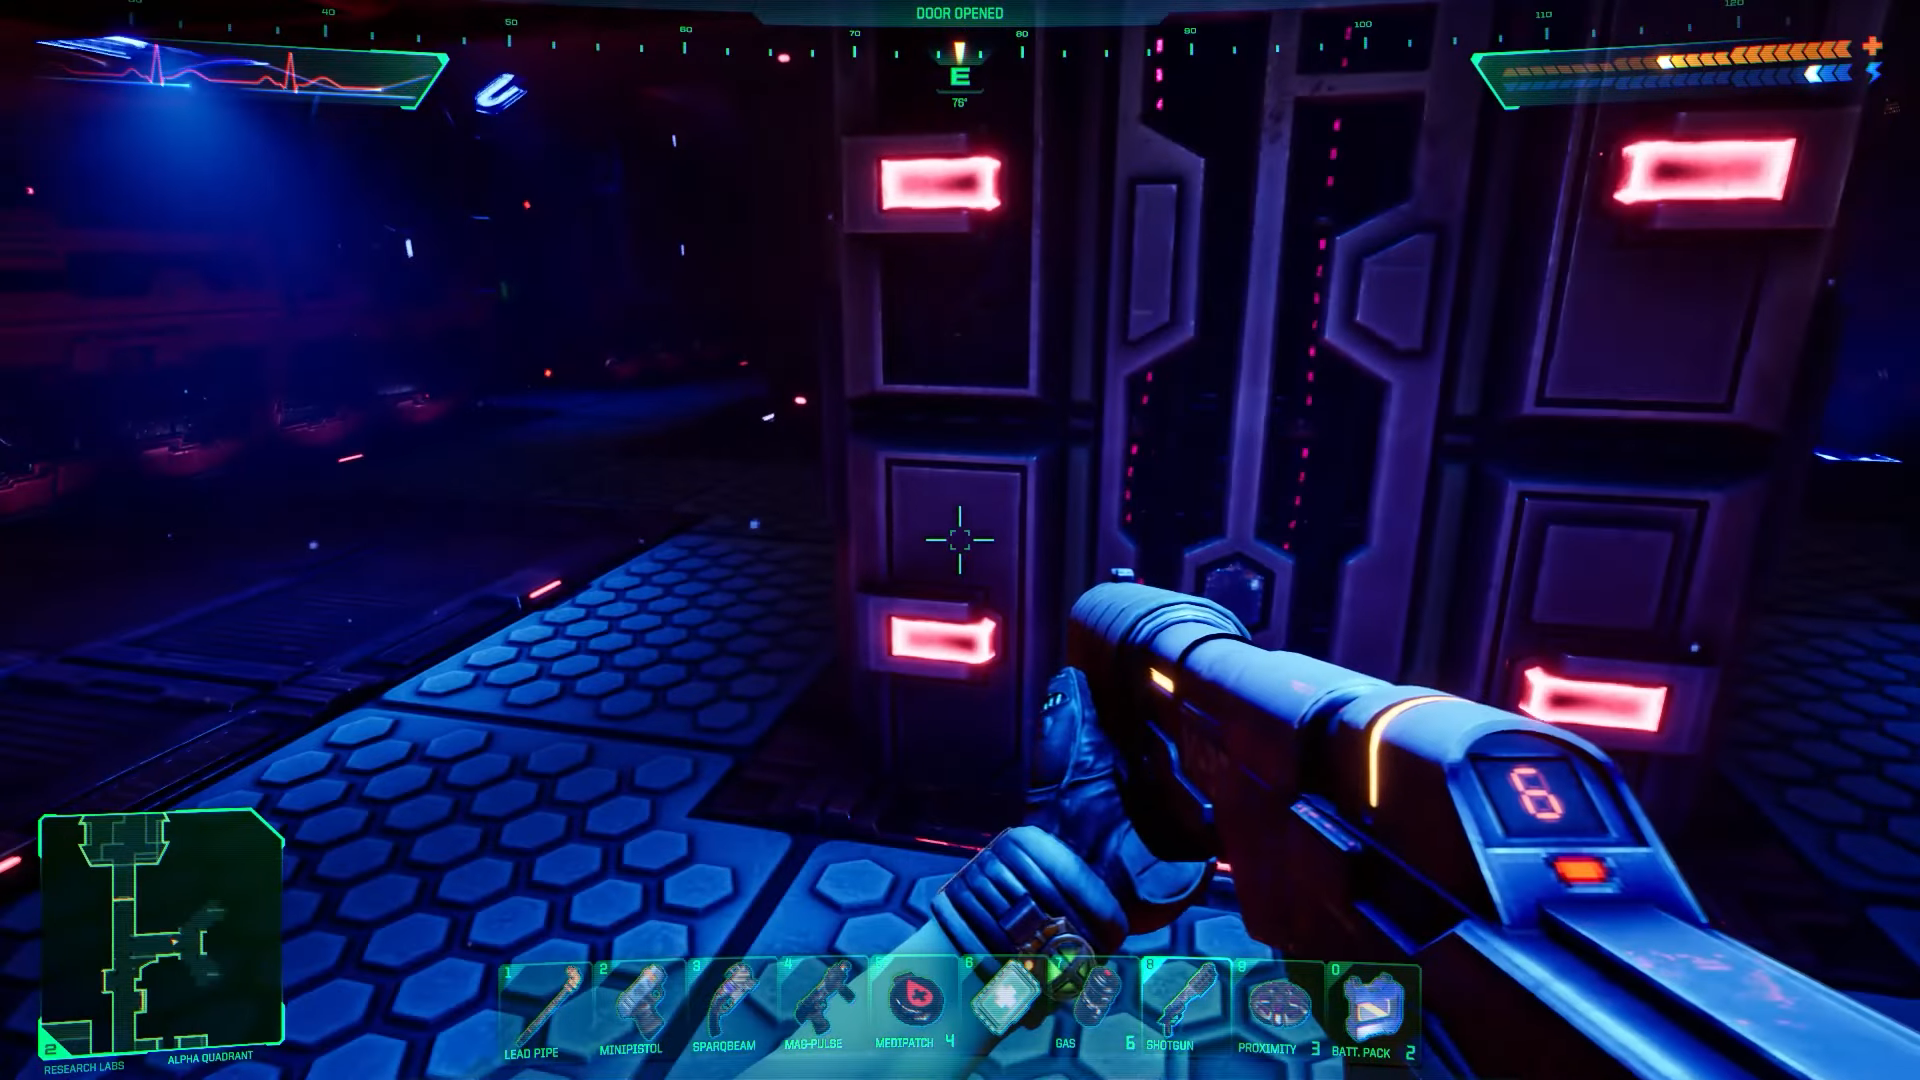 Media asset in full size related to 3dfxzone.it news item entitled as follows: Nightdive Studios pubblica un nuovo gameplay trailer di System Shock | Image Name: news32227_System-Shock-Screenshot_2.png